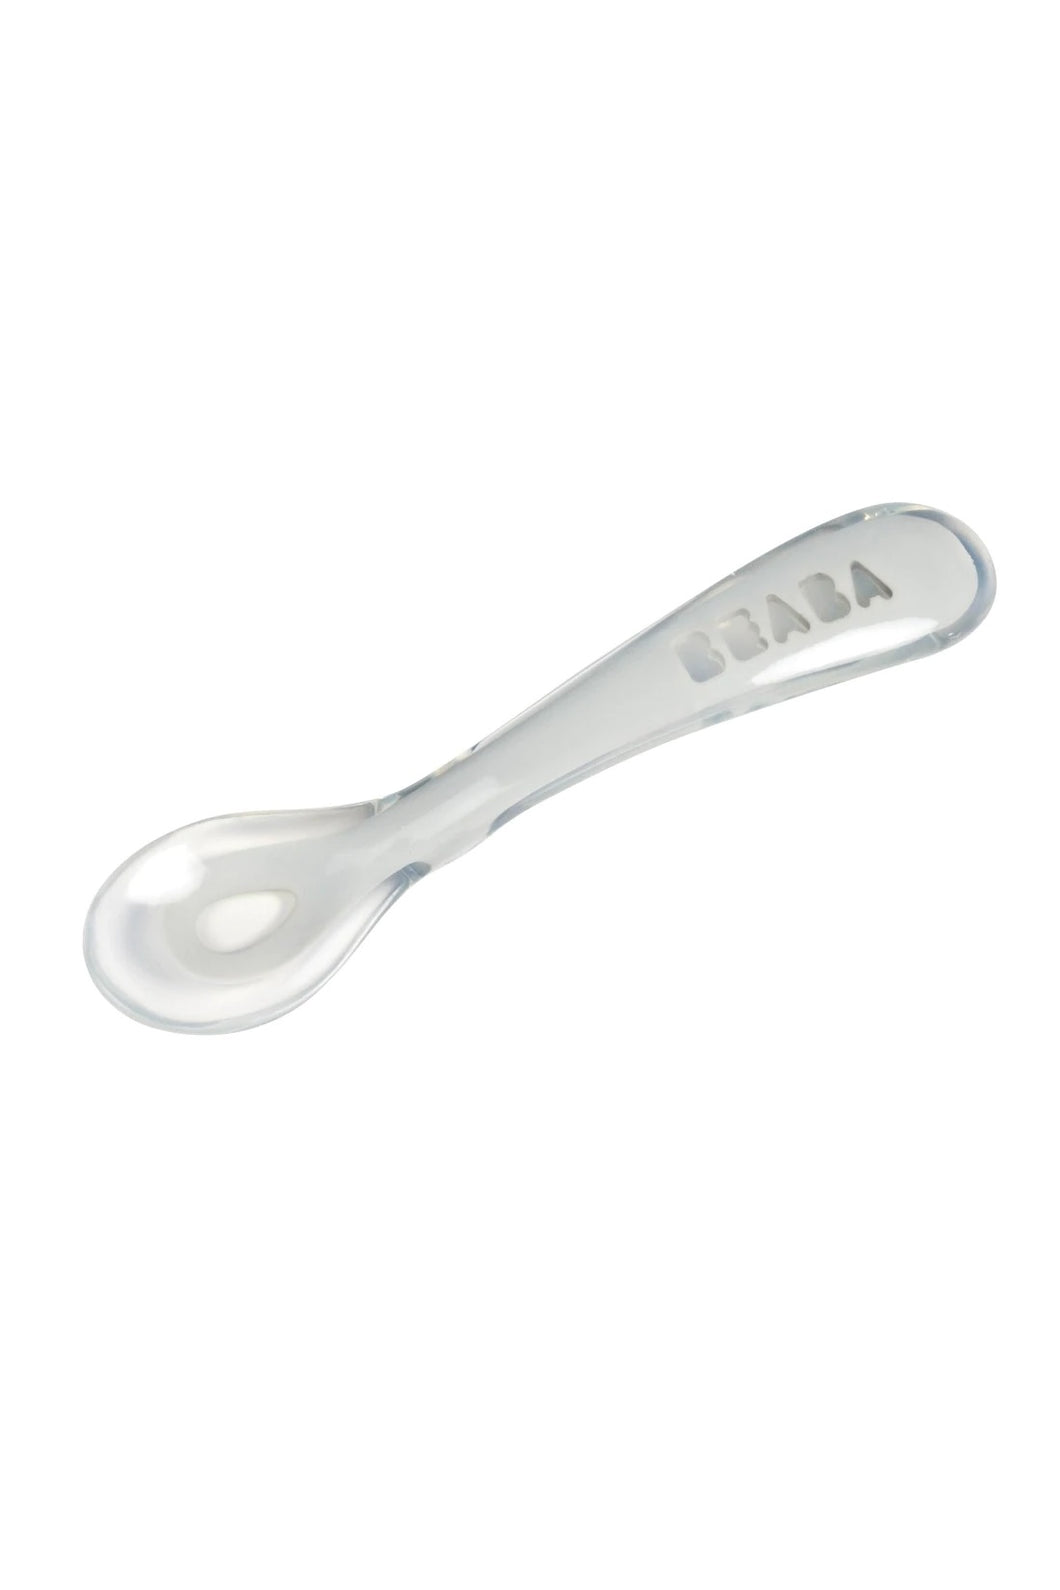 Beaba 2Nd Age Soft Silicone Spoon Light Grey 1